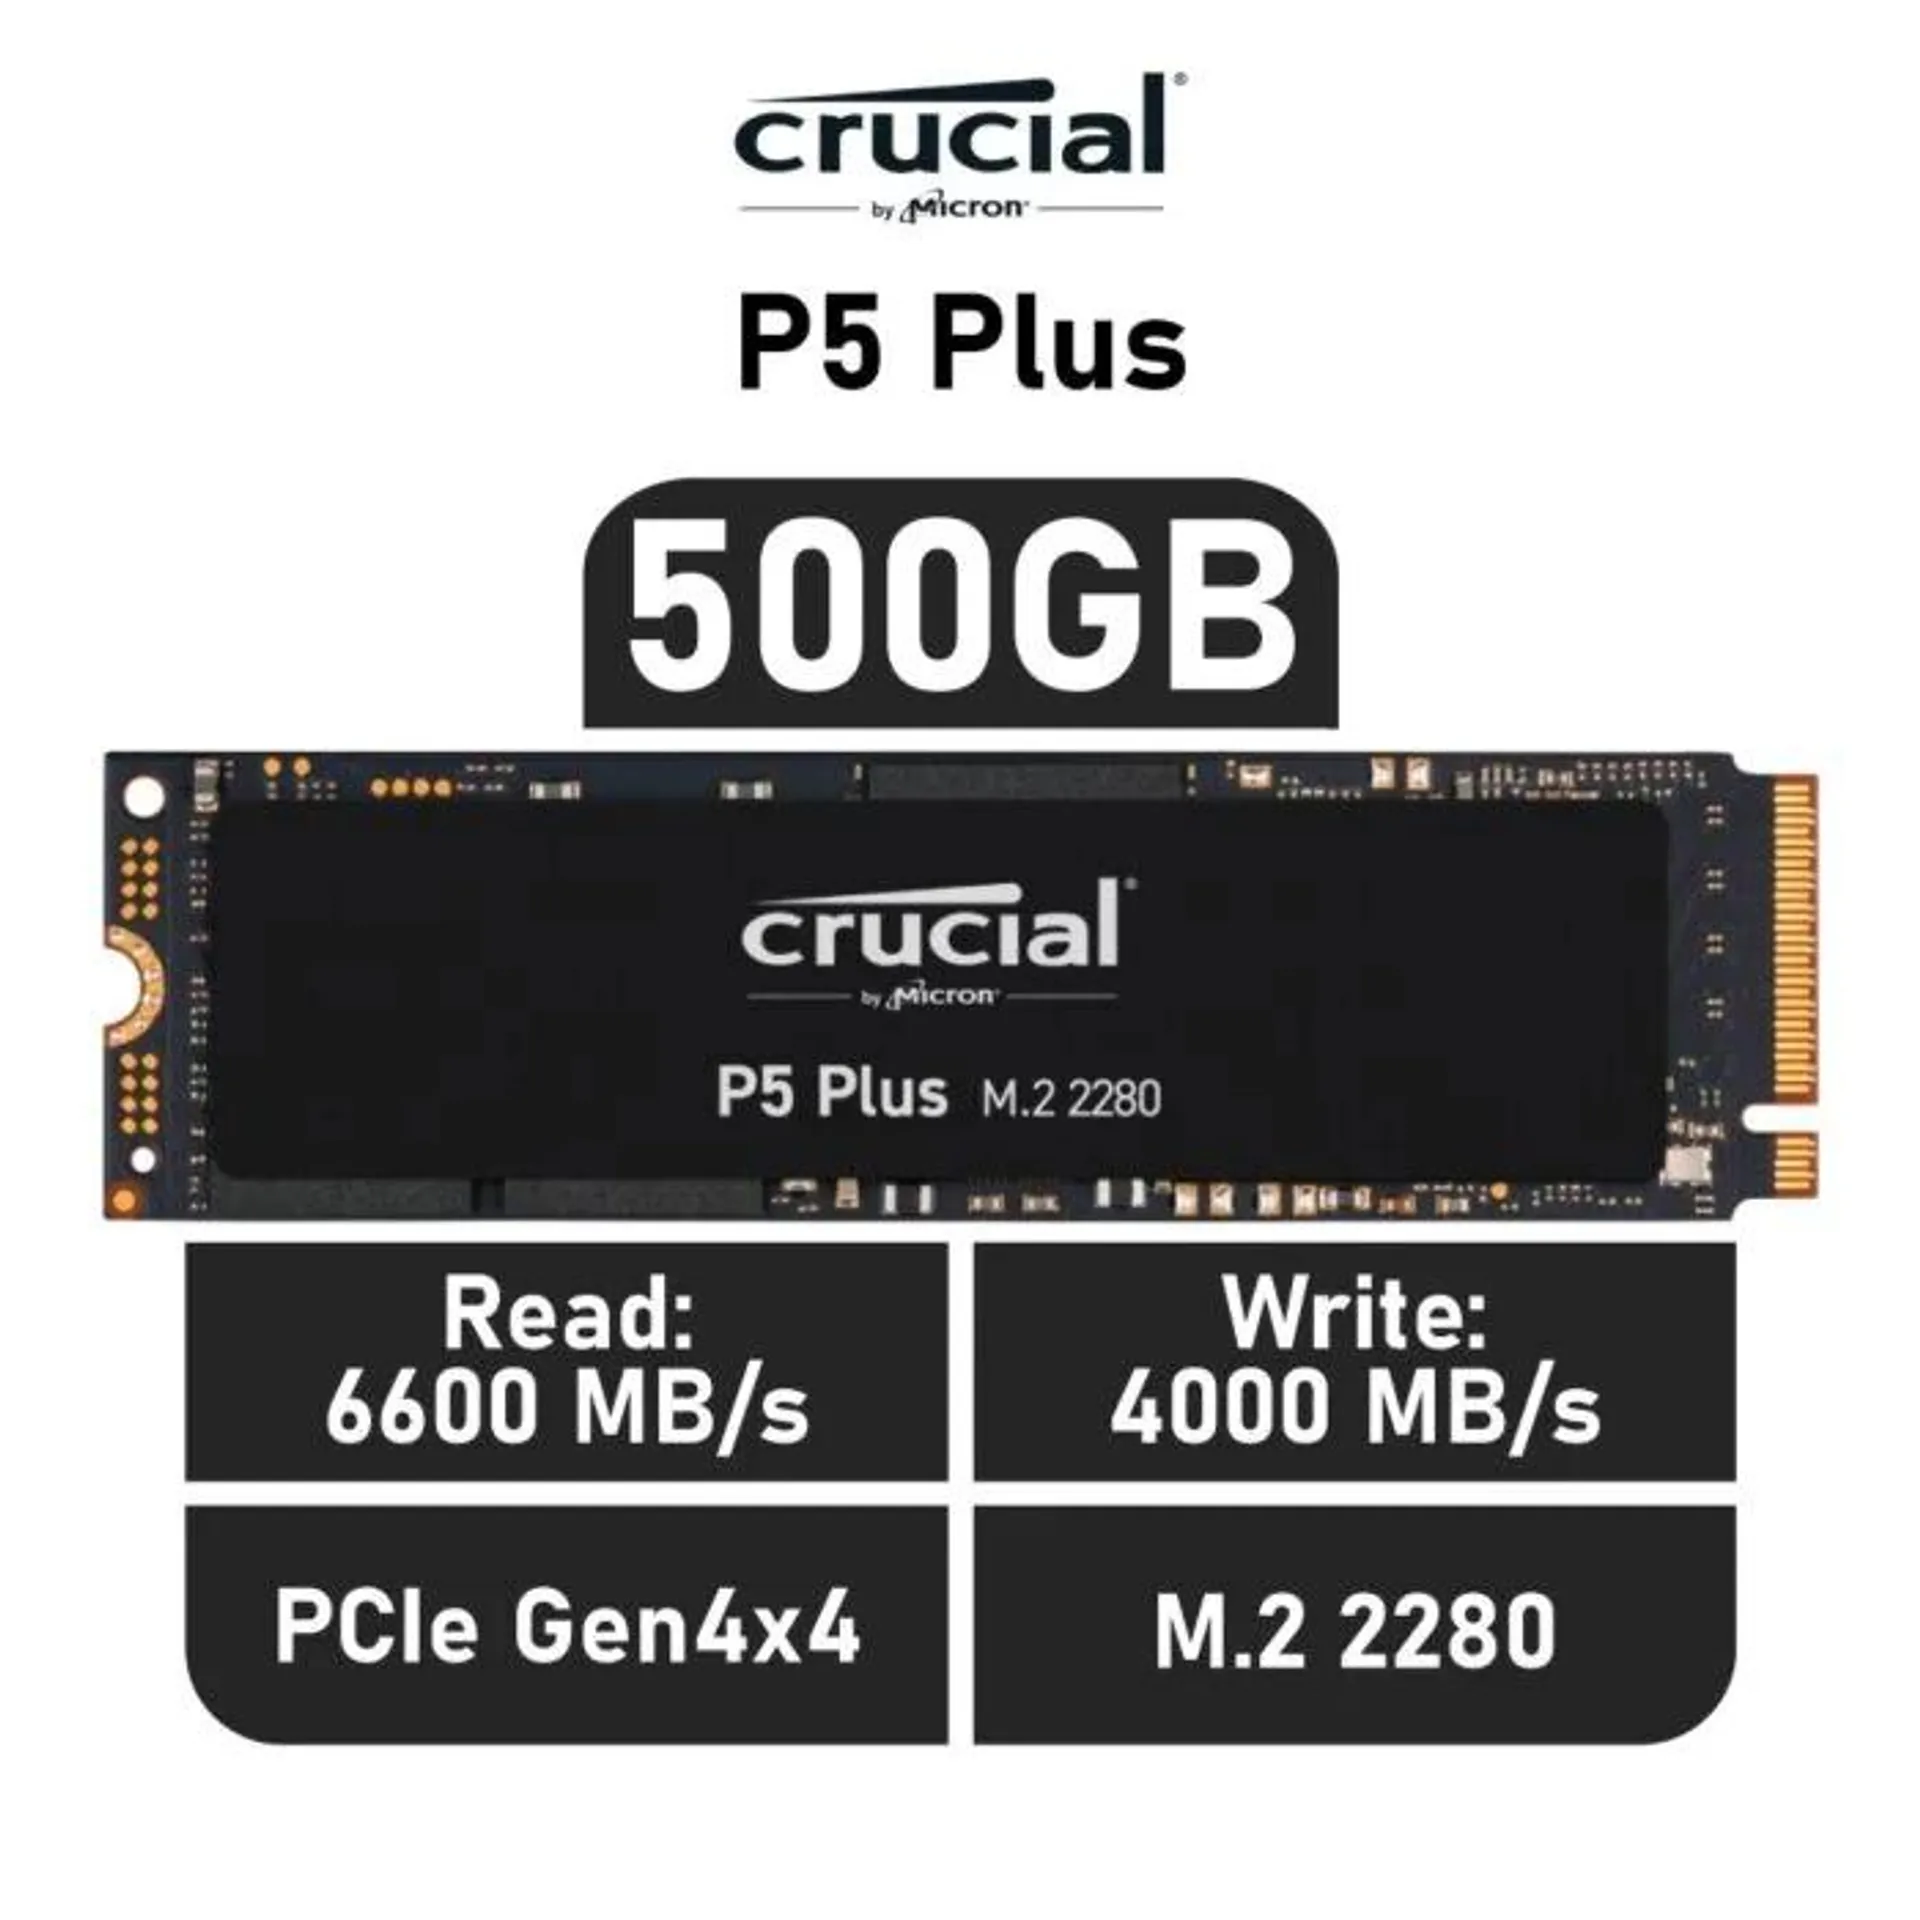 Crucial P5 Plus 500GB PCIe Gen4x4 CT500P5PSSD8 M.2 2280 Solid State Drive